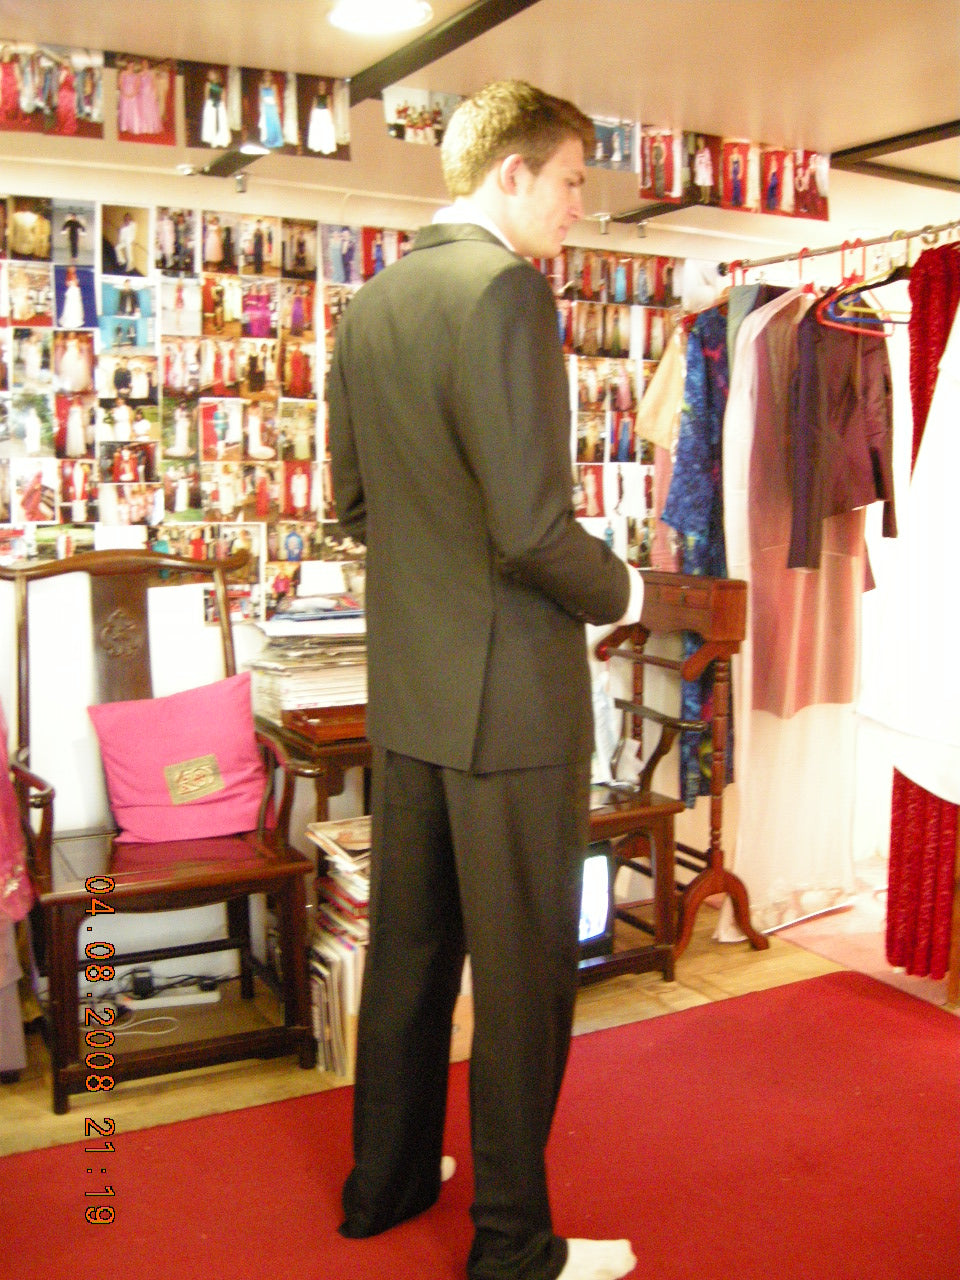 Bespoke suits